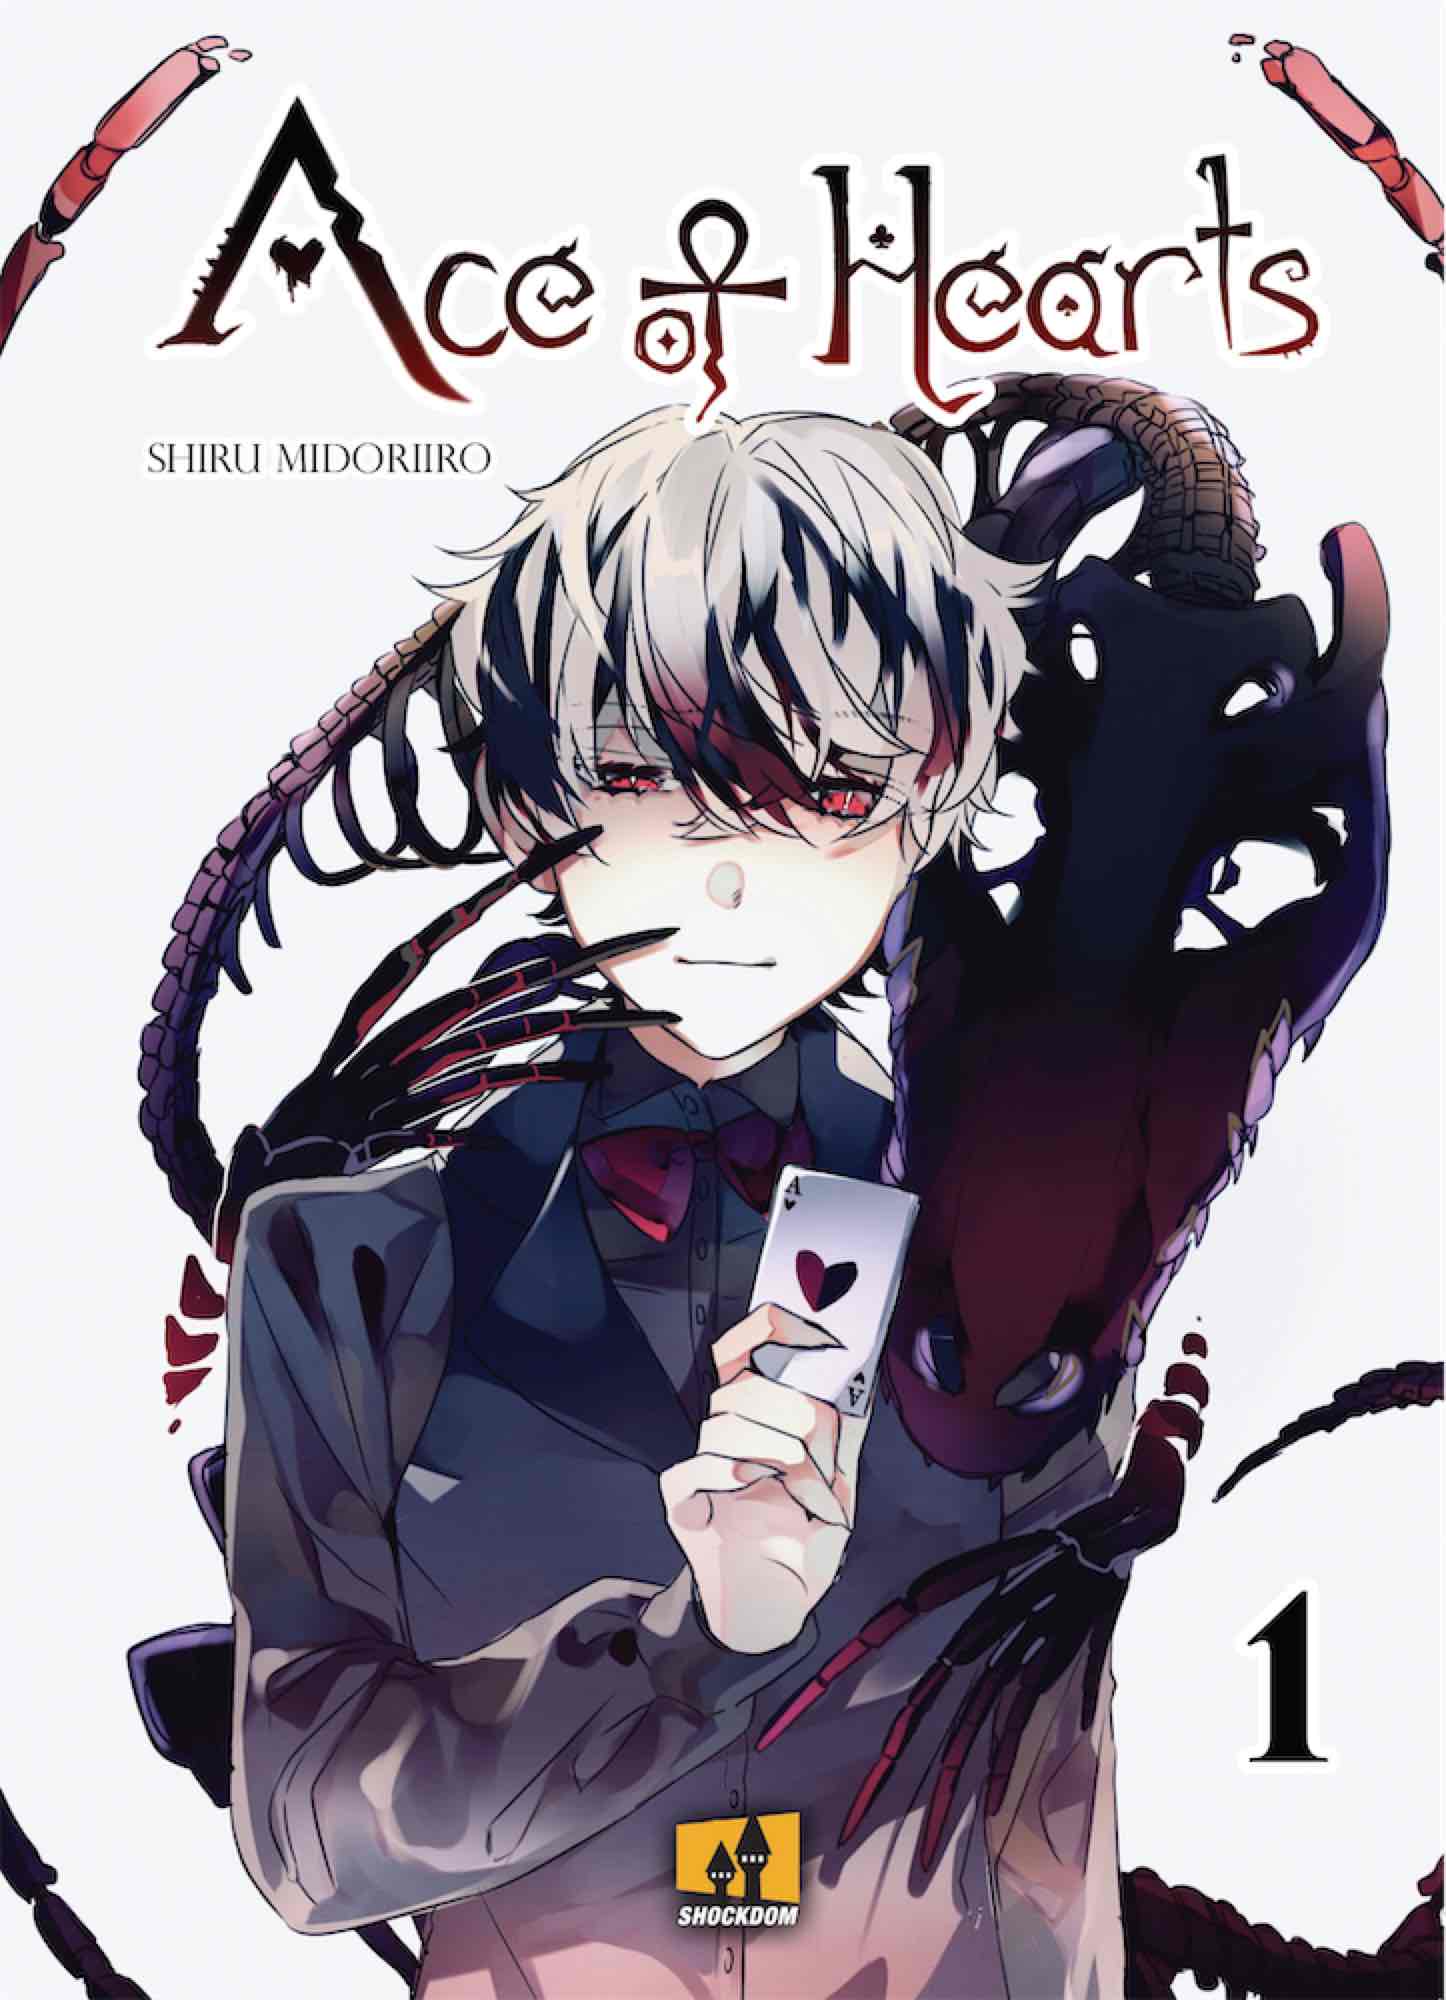 ACE OF HEARTS 01